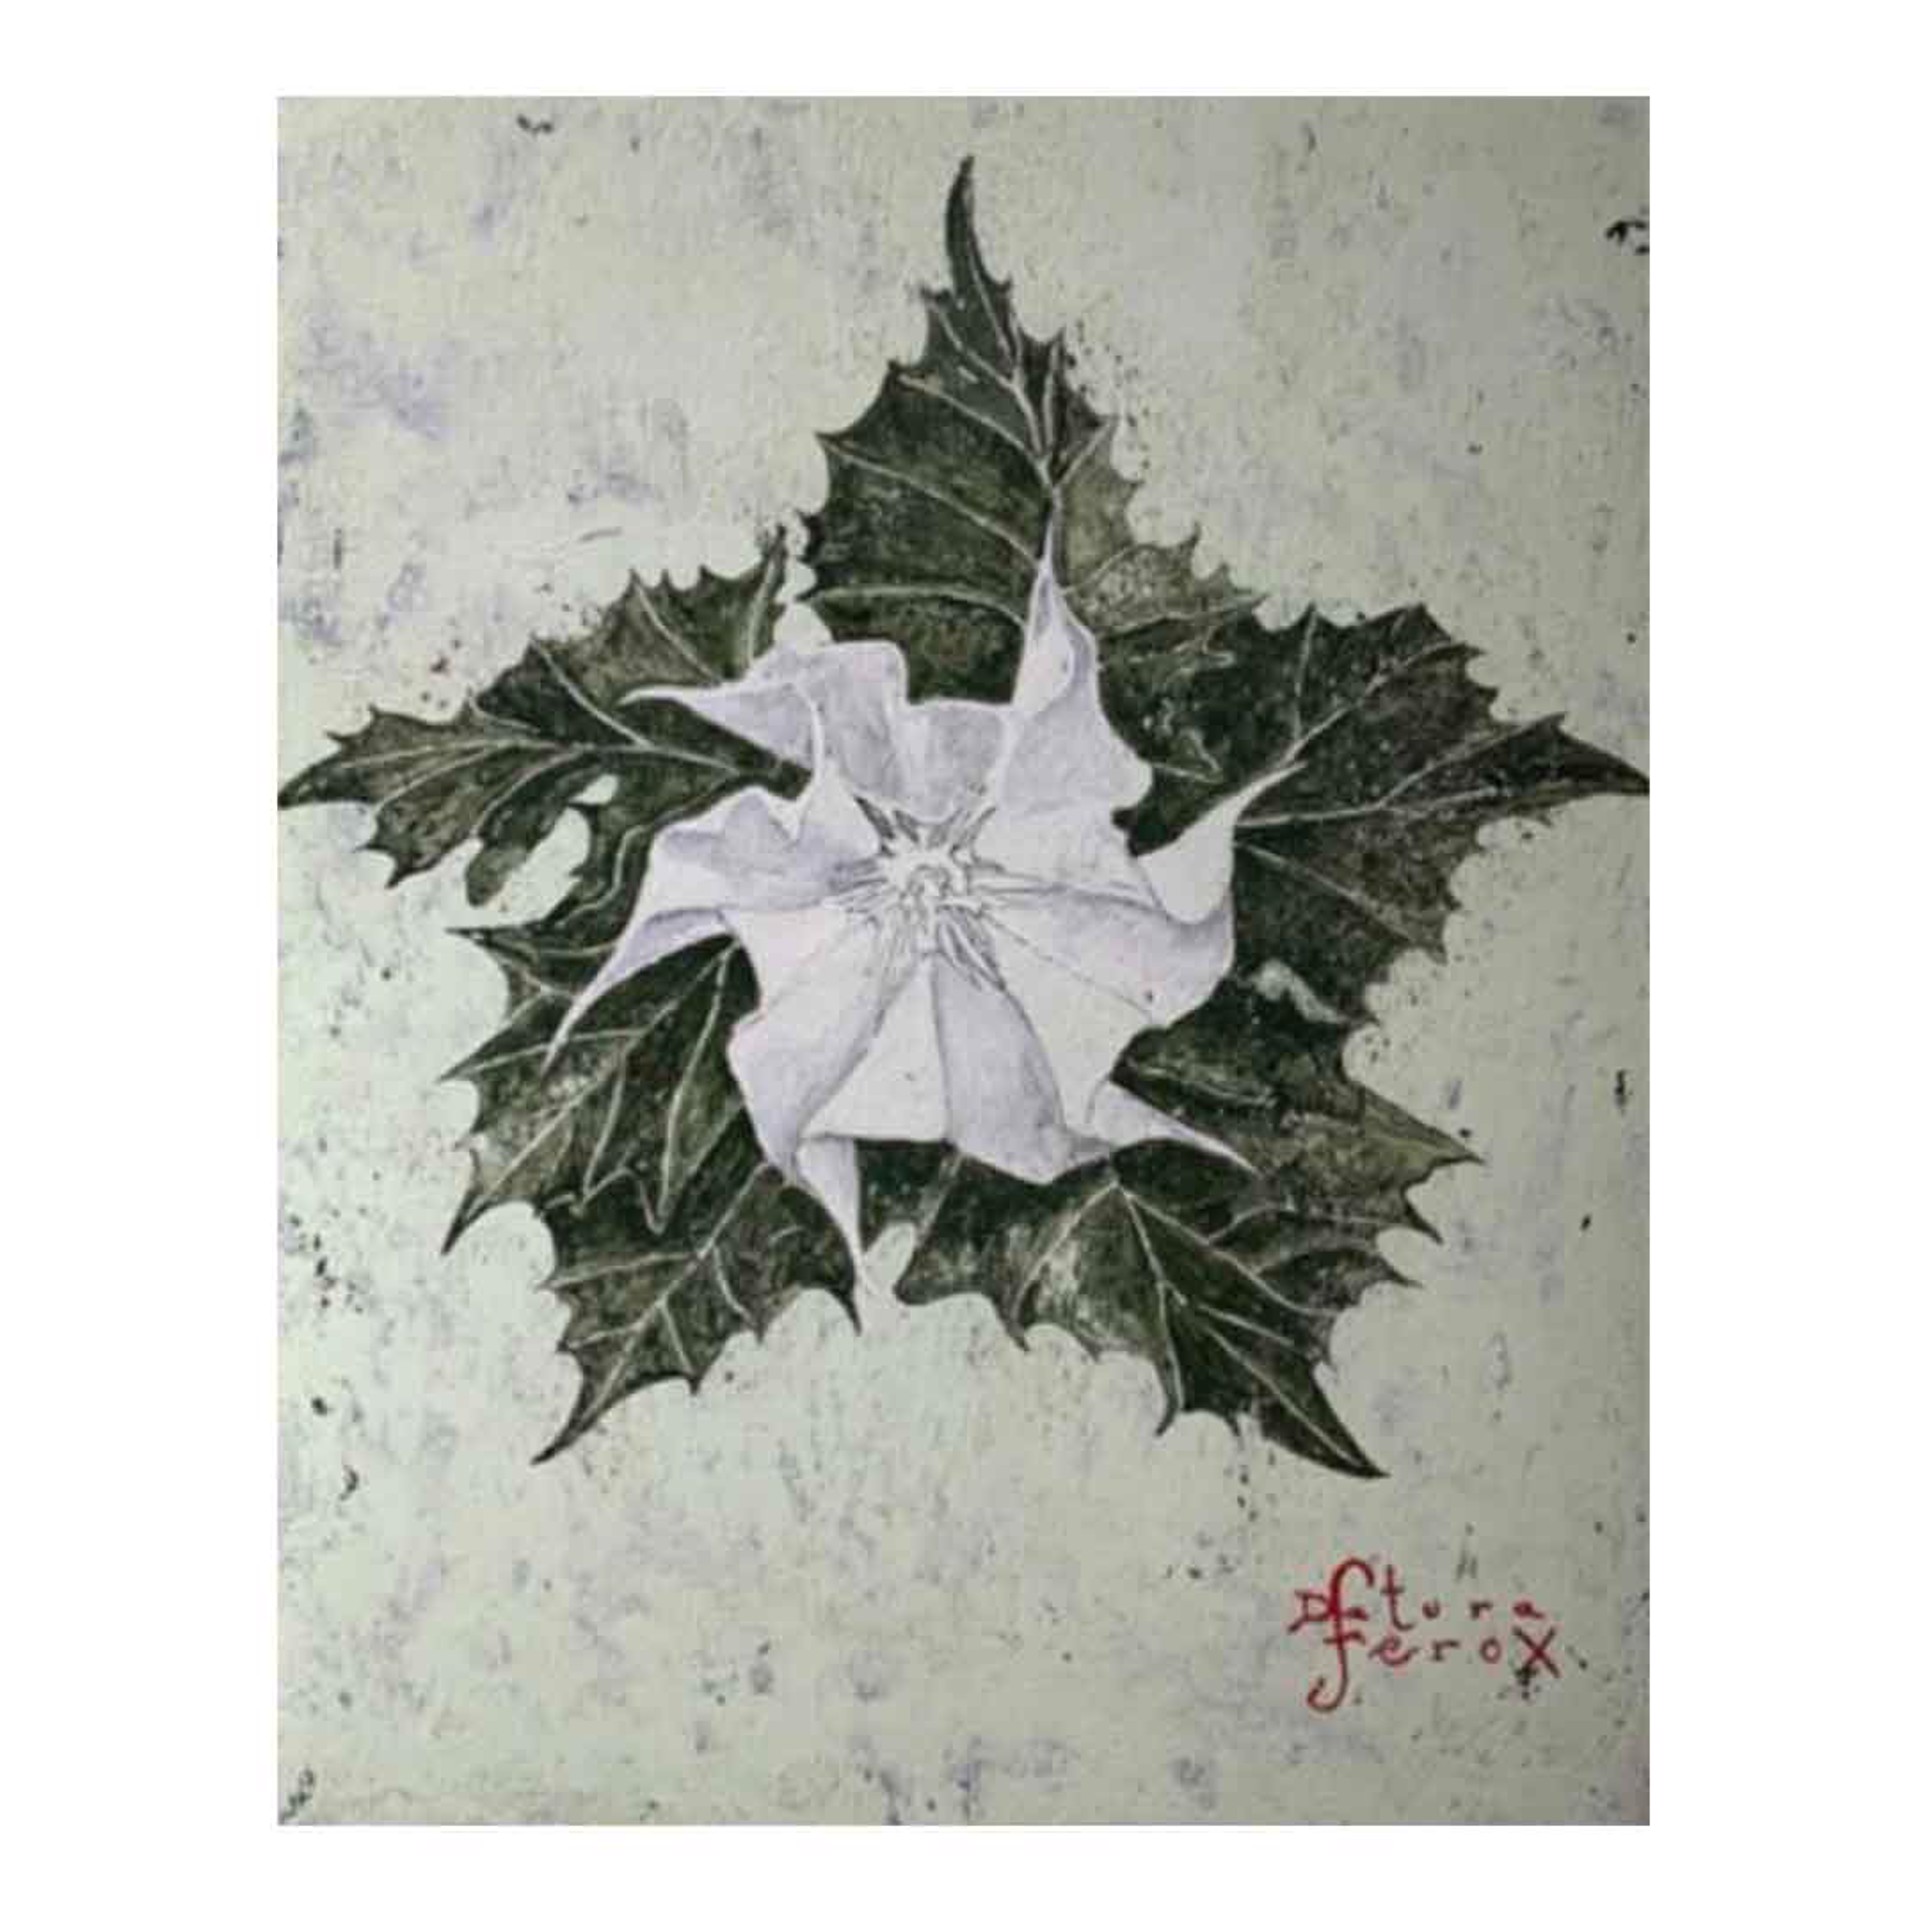 Datura Ferox by Dominique Rousserie by St Barth Artwork